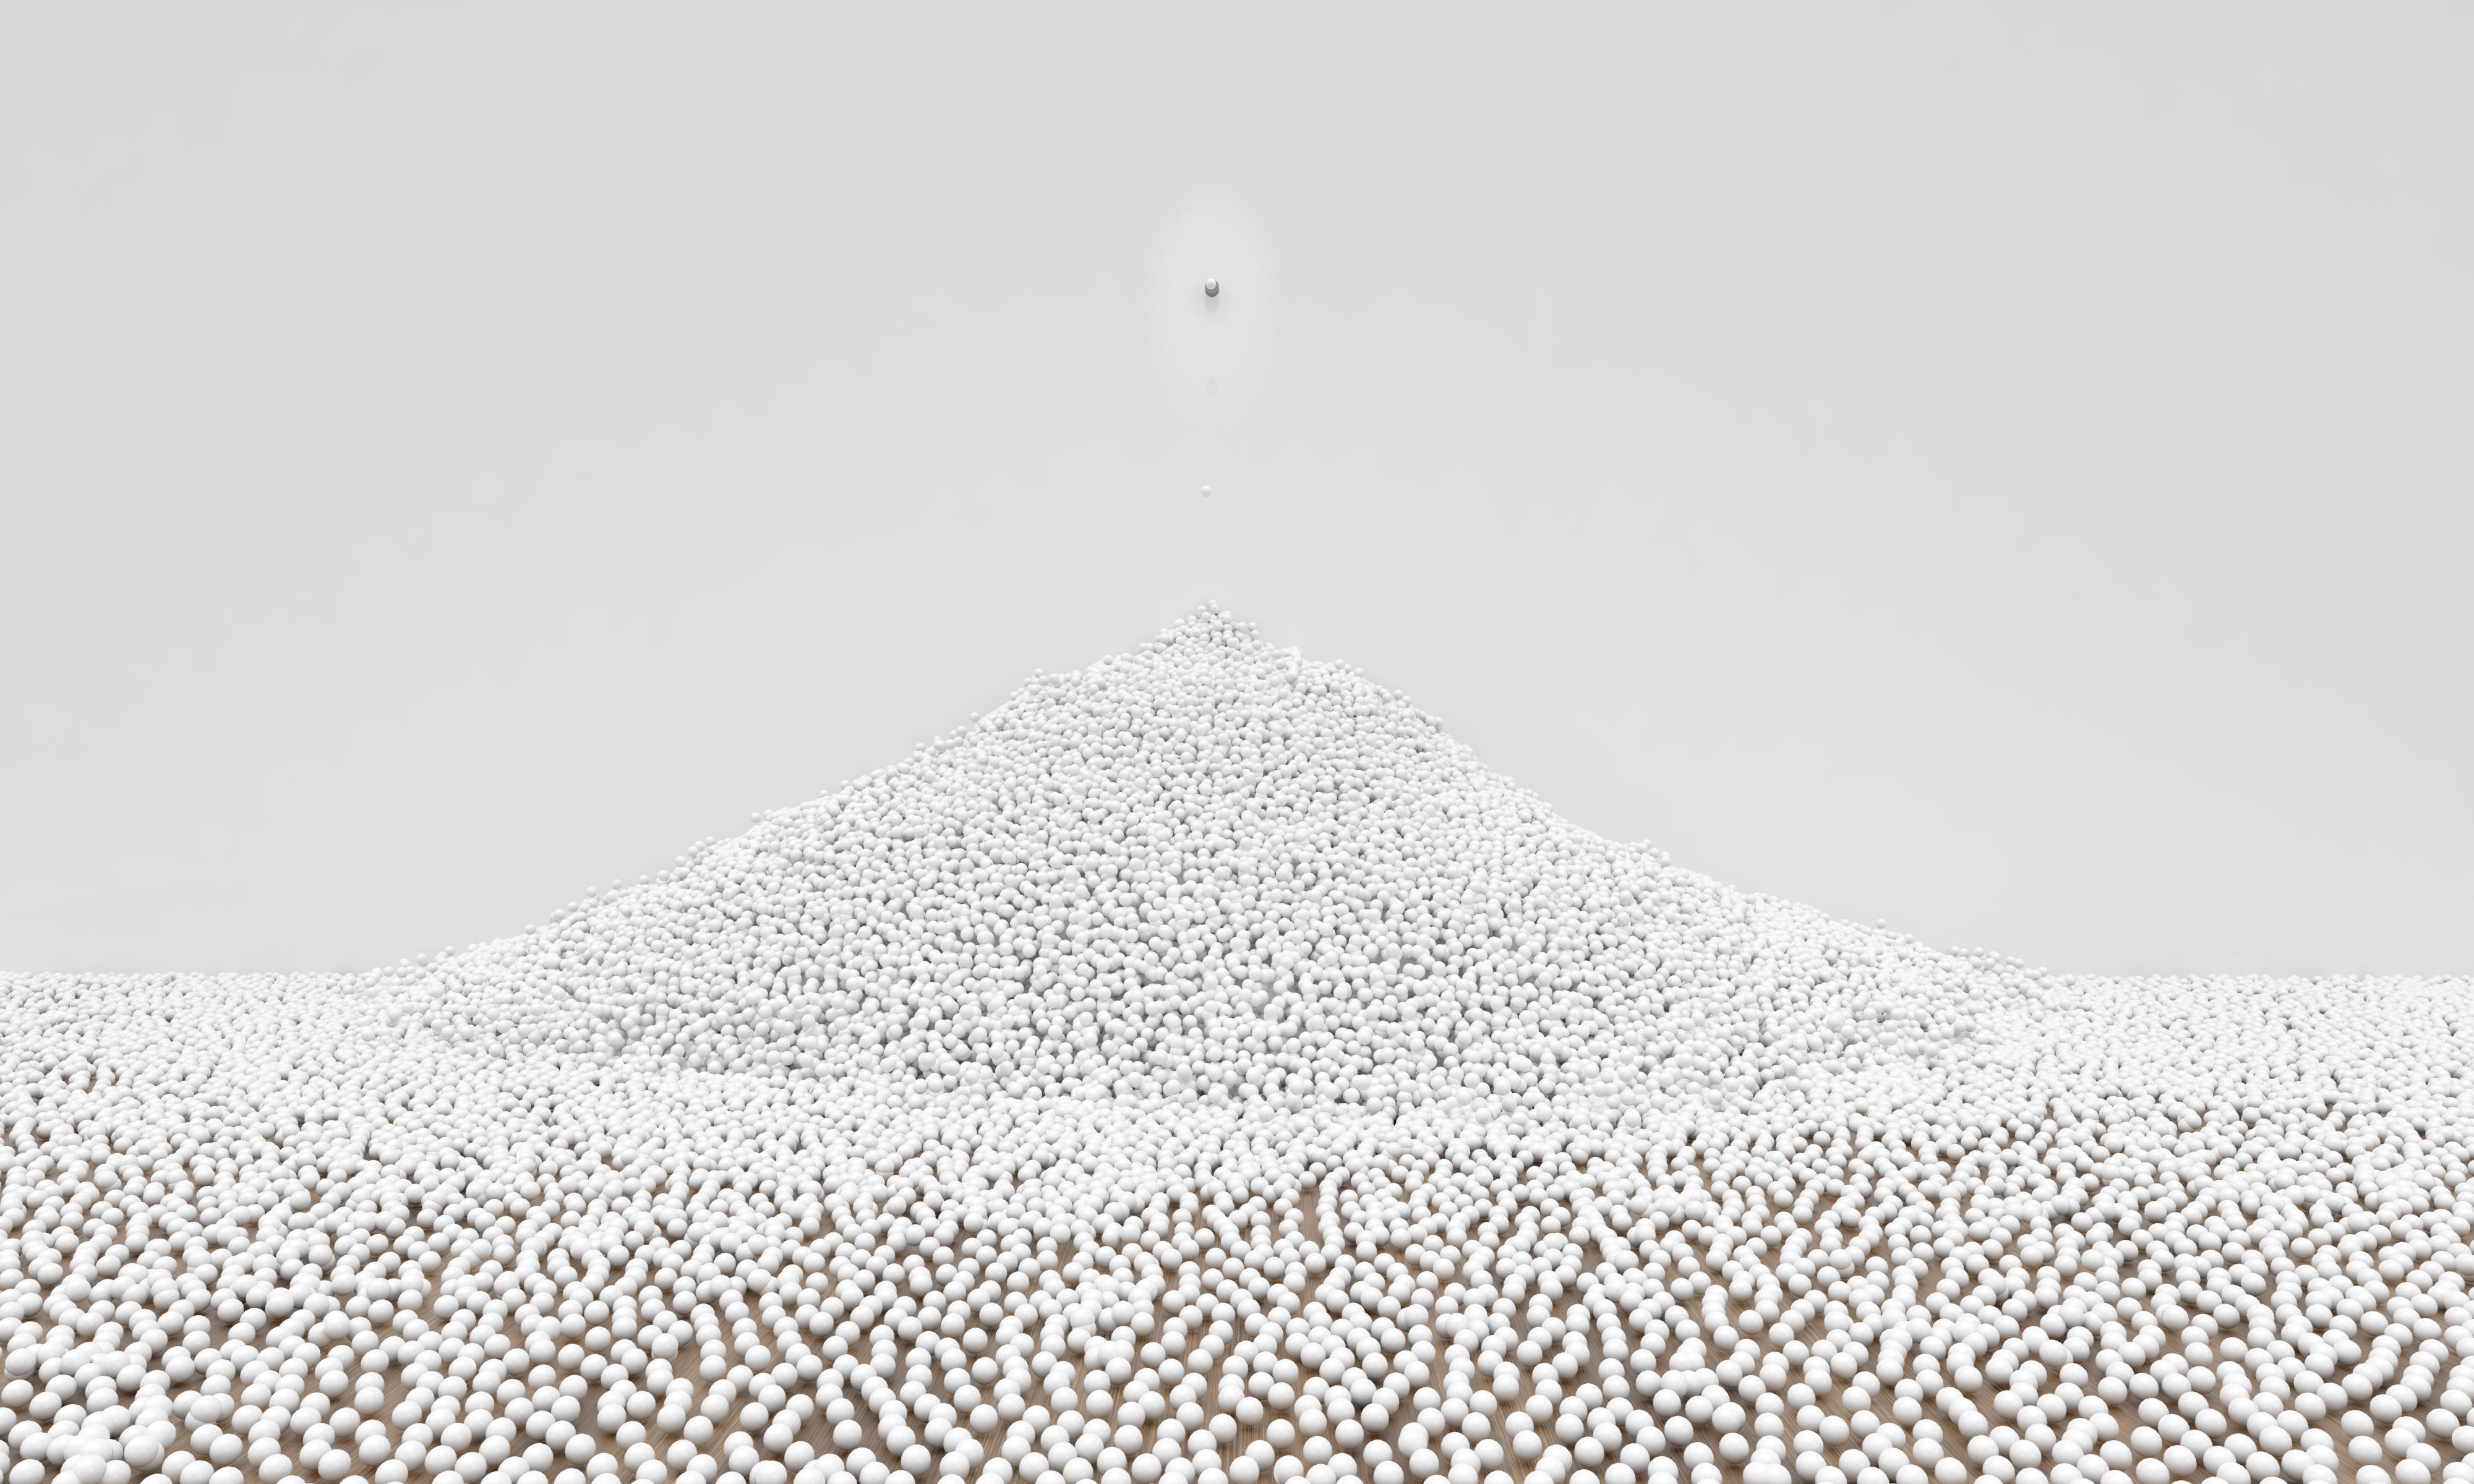 COS and Snarkitecture collaborate on an art installation in Seoul